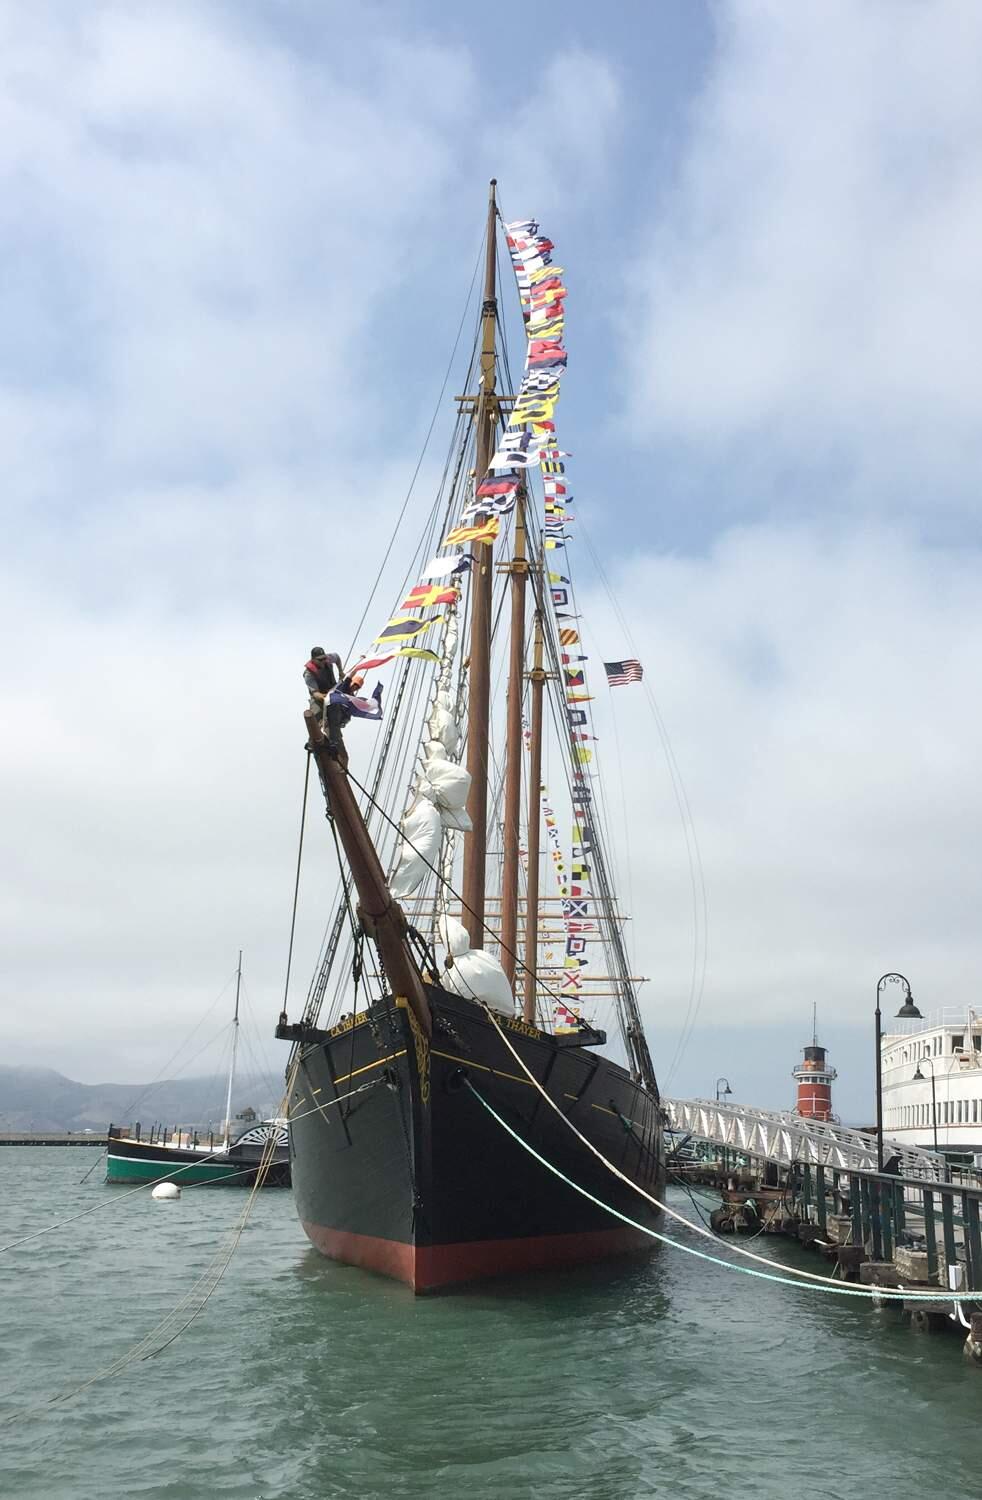 The C.A. Thayer lumber schooner at San Francisco Maritime National Historical Park. (Photo courtesy of San Francisco Maritime National Park )